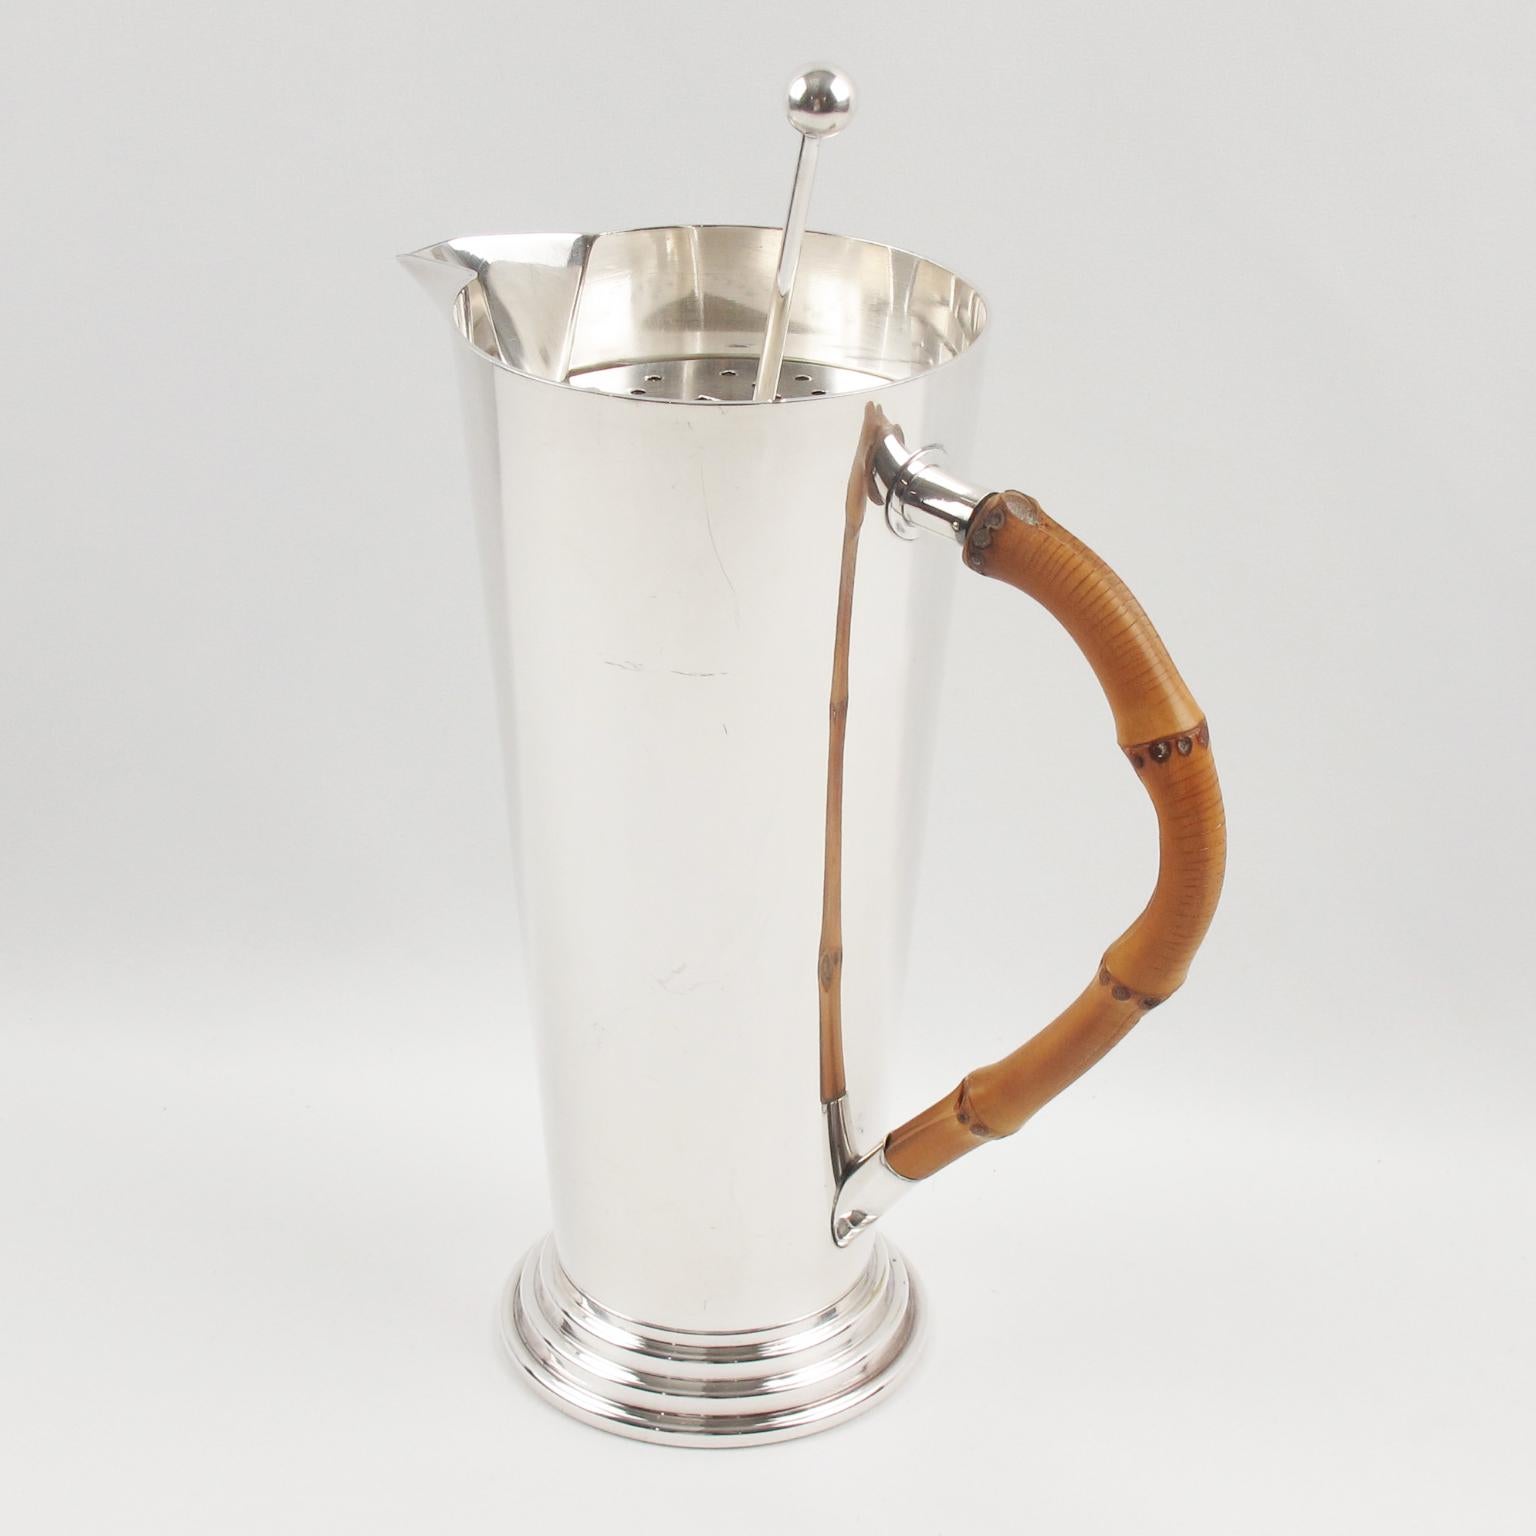 A streamline and Minimalist barware set designed by French silversmith Maison Deschamps Frères, Paris. Sleek and modernist design with extra tall silver plate Martini pitcher with extremely elegant real bamboo handle and long stirrer spoon. Marked